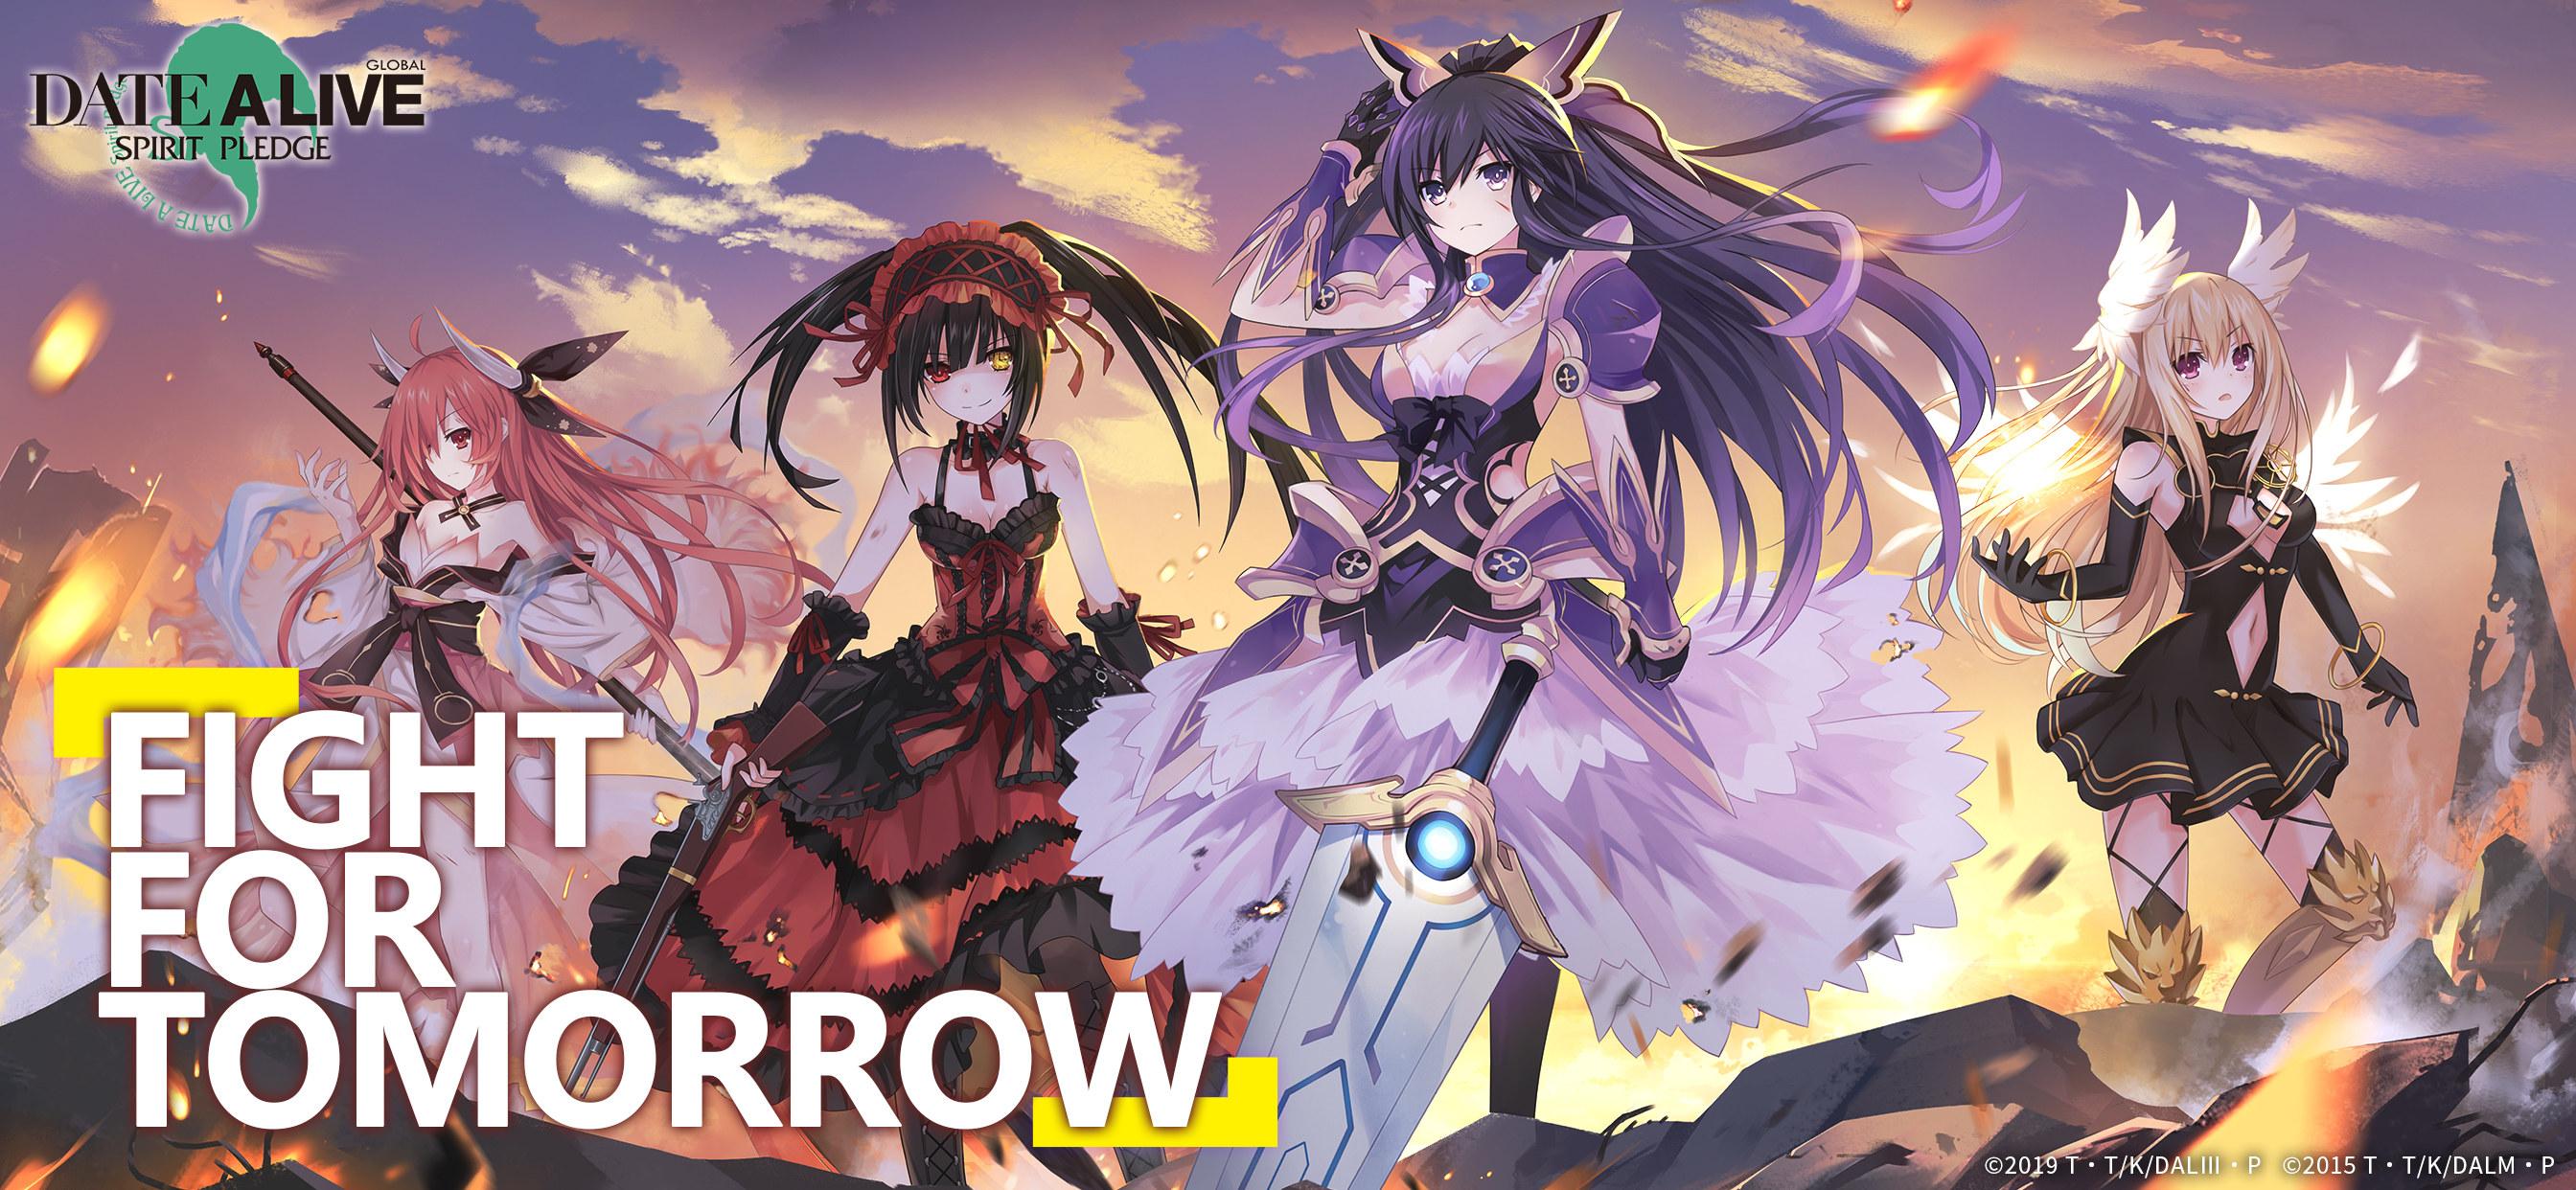 Date A Live: Spirit Pledge HD is Shutting Down on May 20 - QooApp News